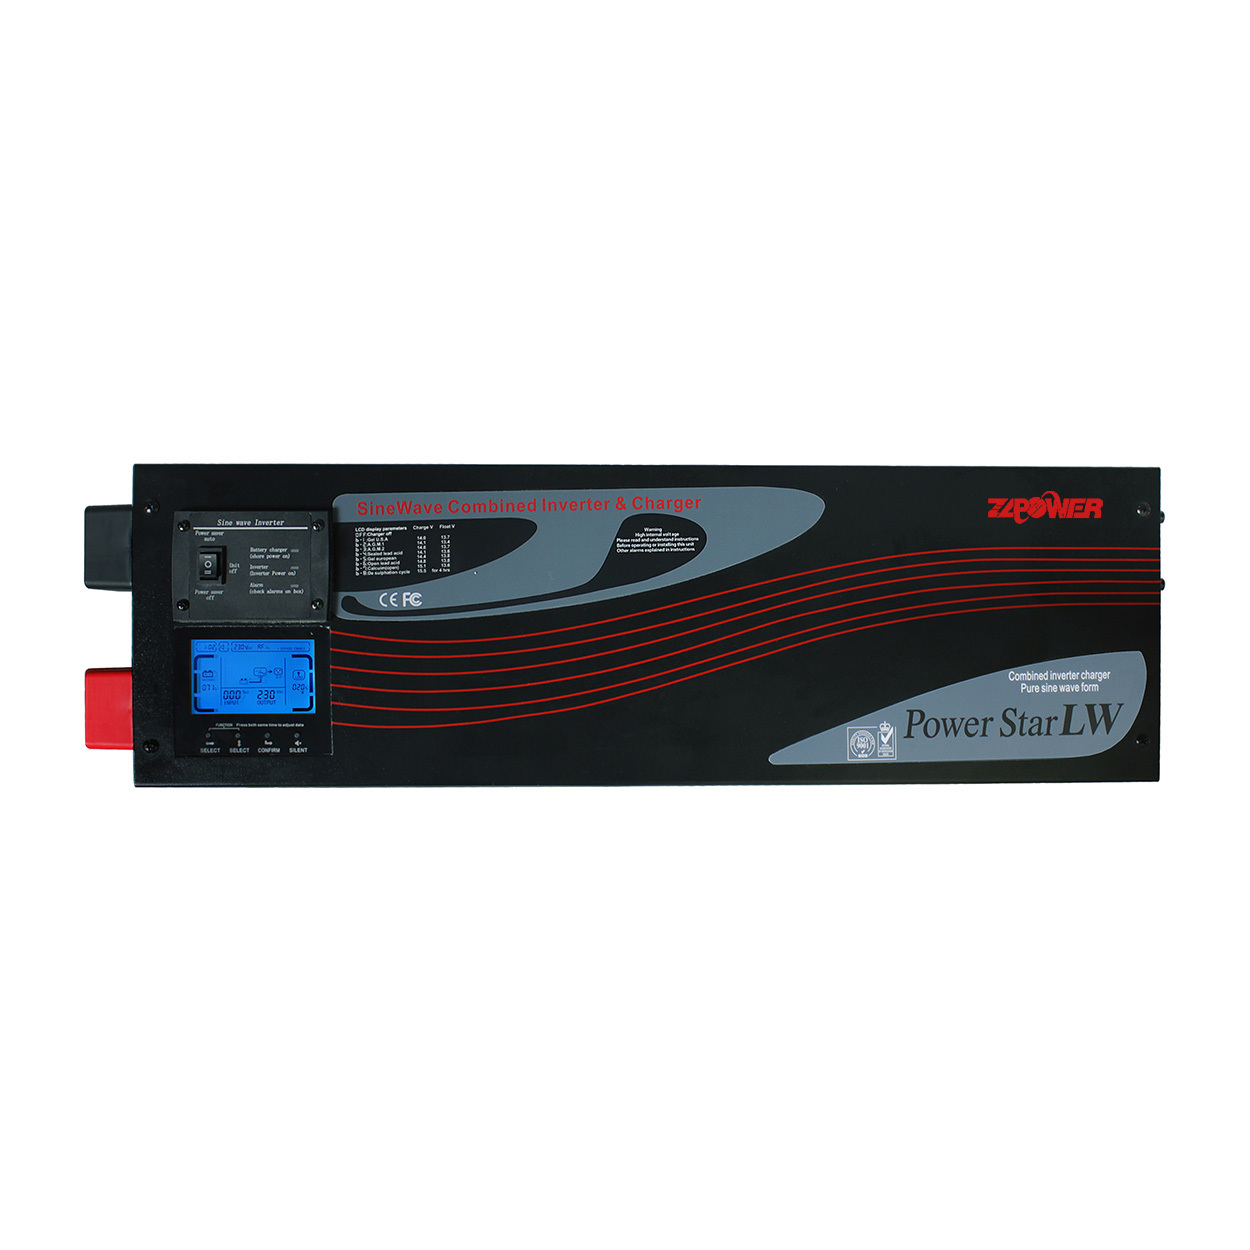 What are the most outstanding advantages of the pure sine wave inverter 3000W 12V from China